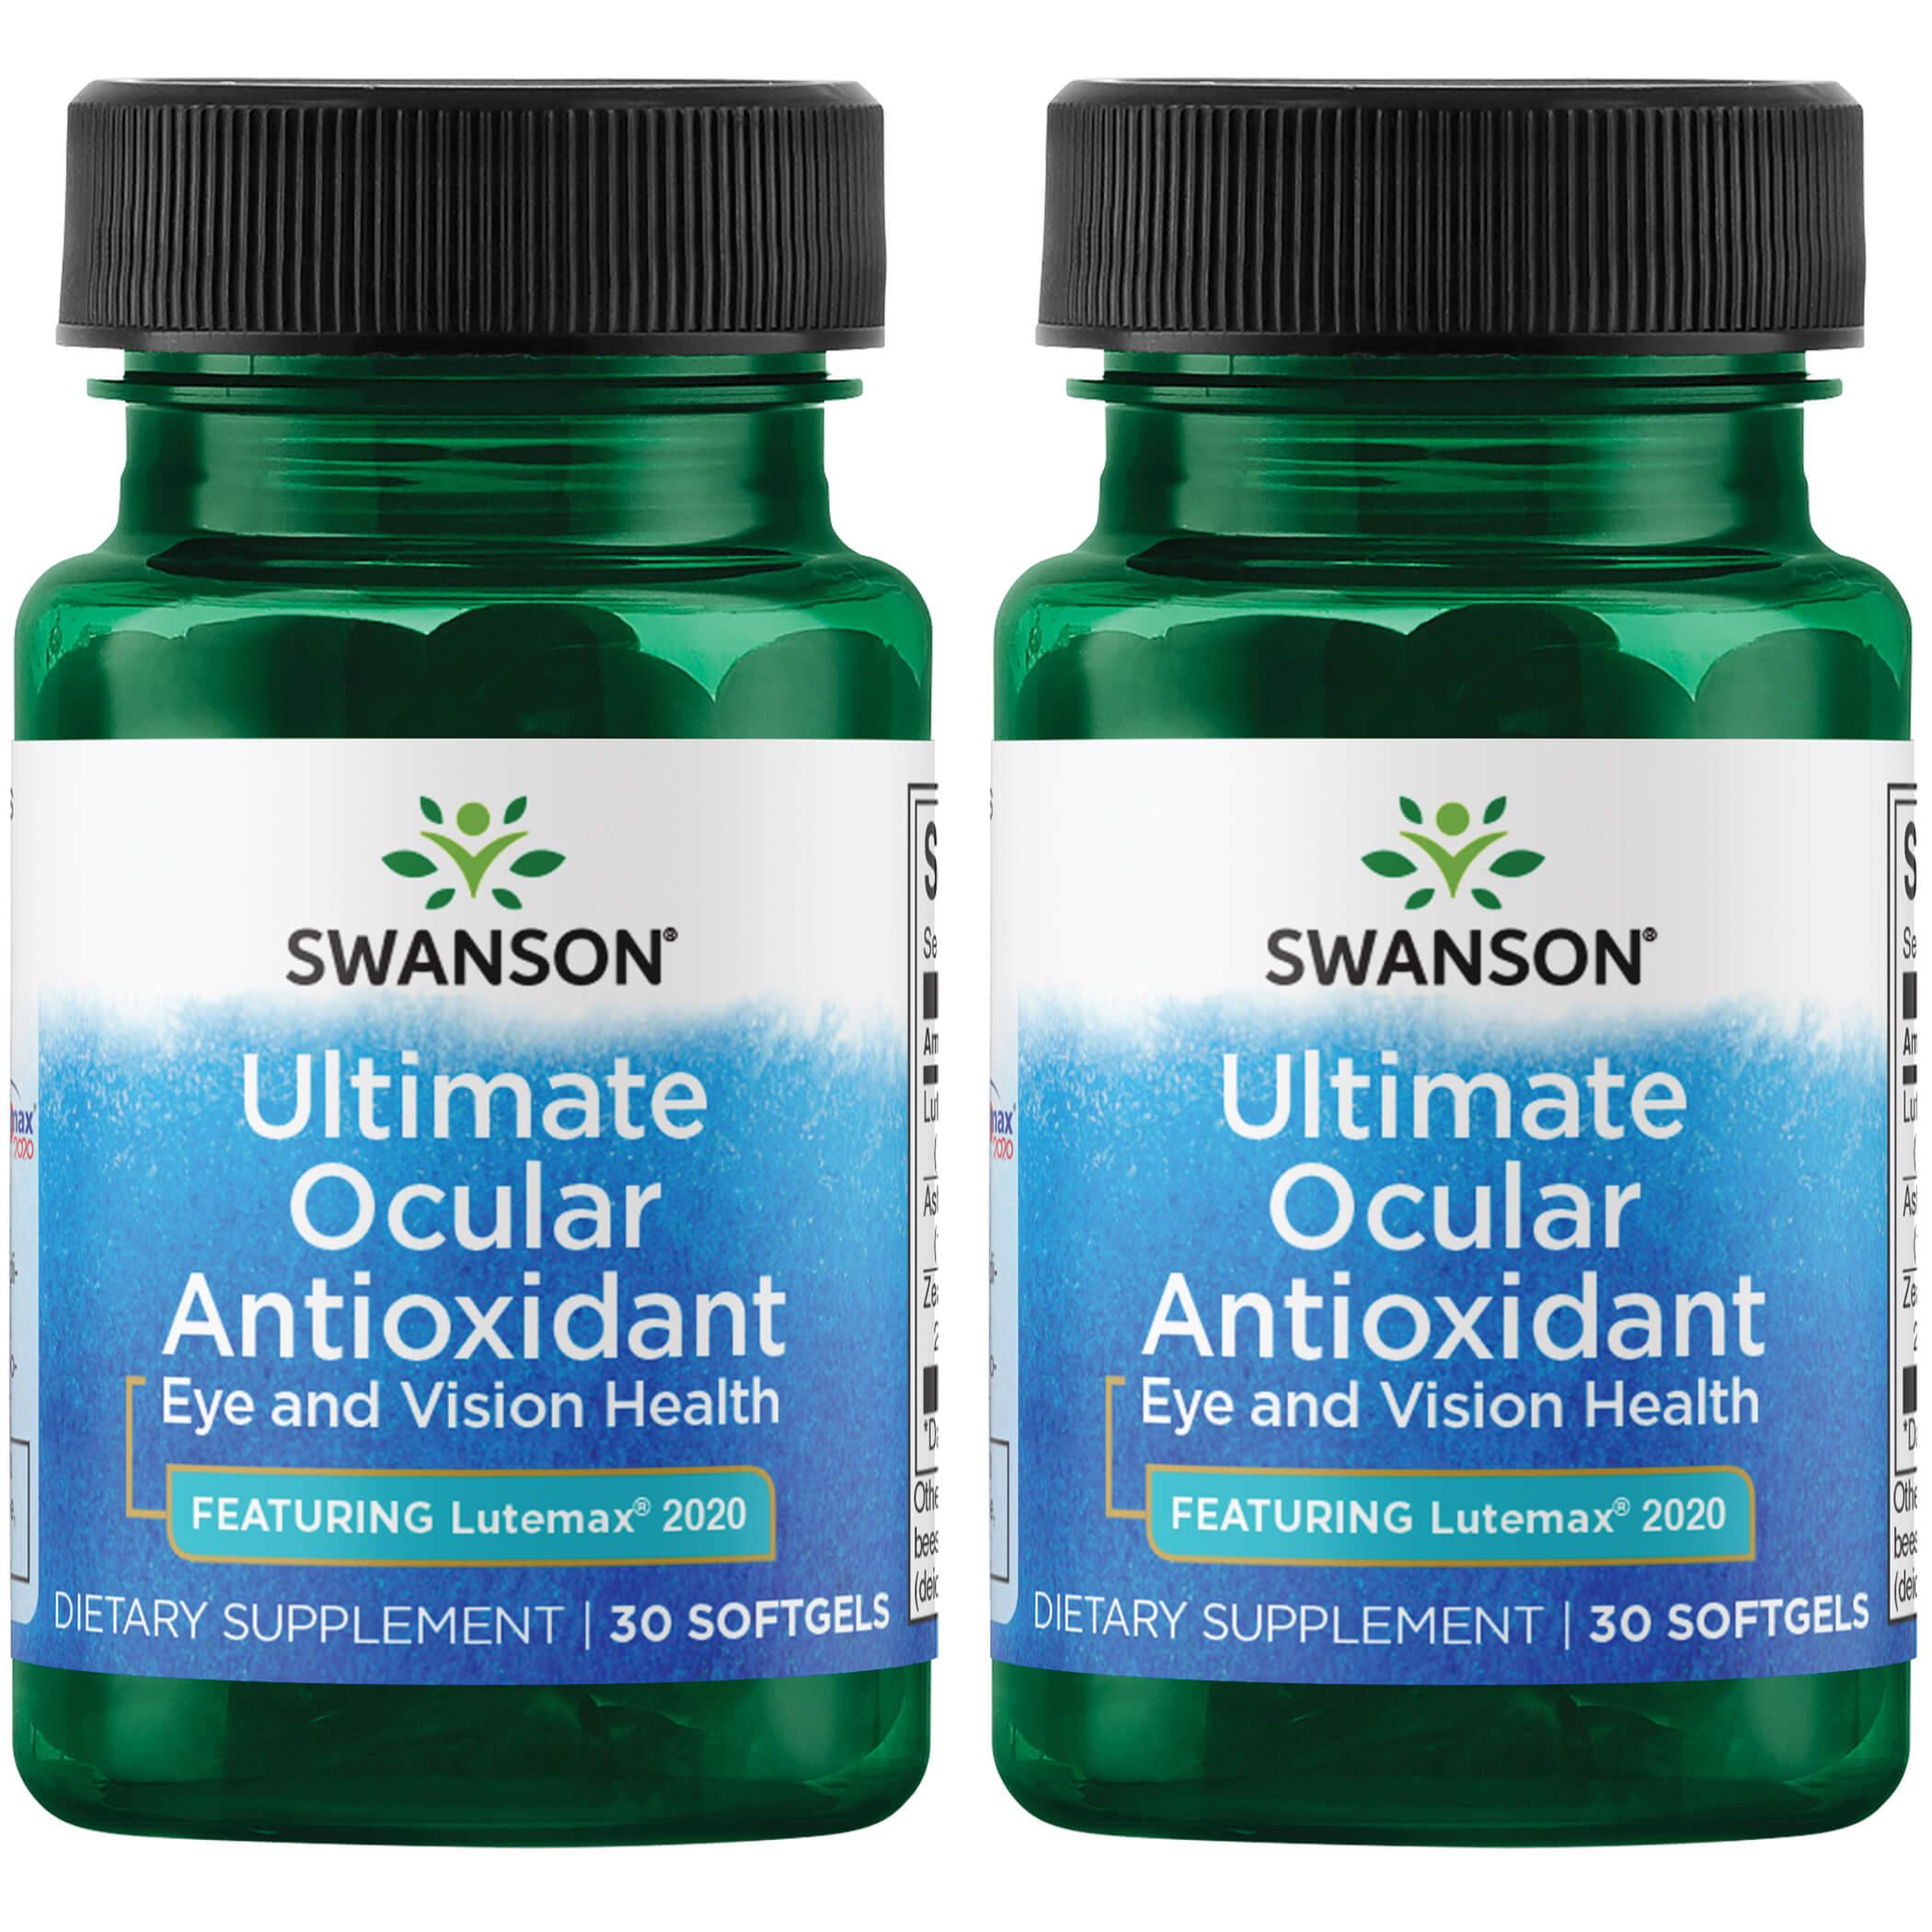 Swanson Ultra Ultimate Ocular Antioxidant - Featuring Lutemax 2020 2 Pack Vitamin 30 Soft Gels